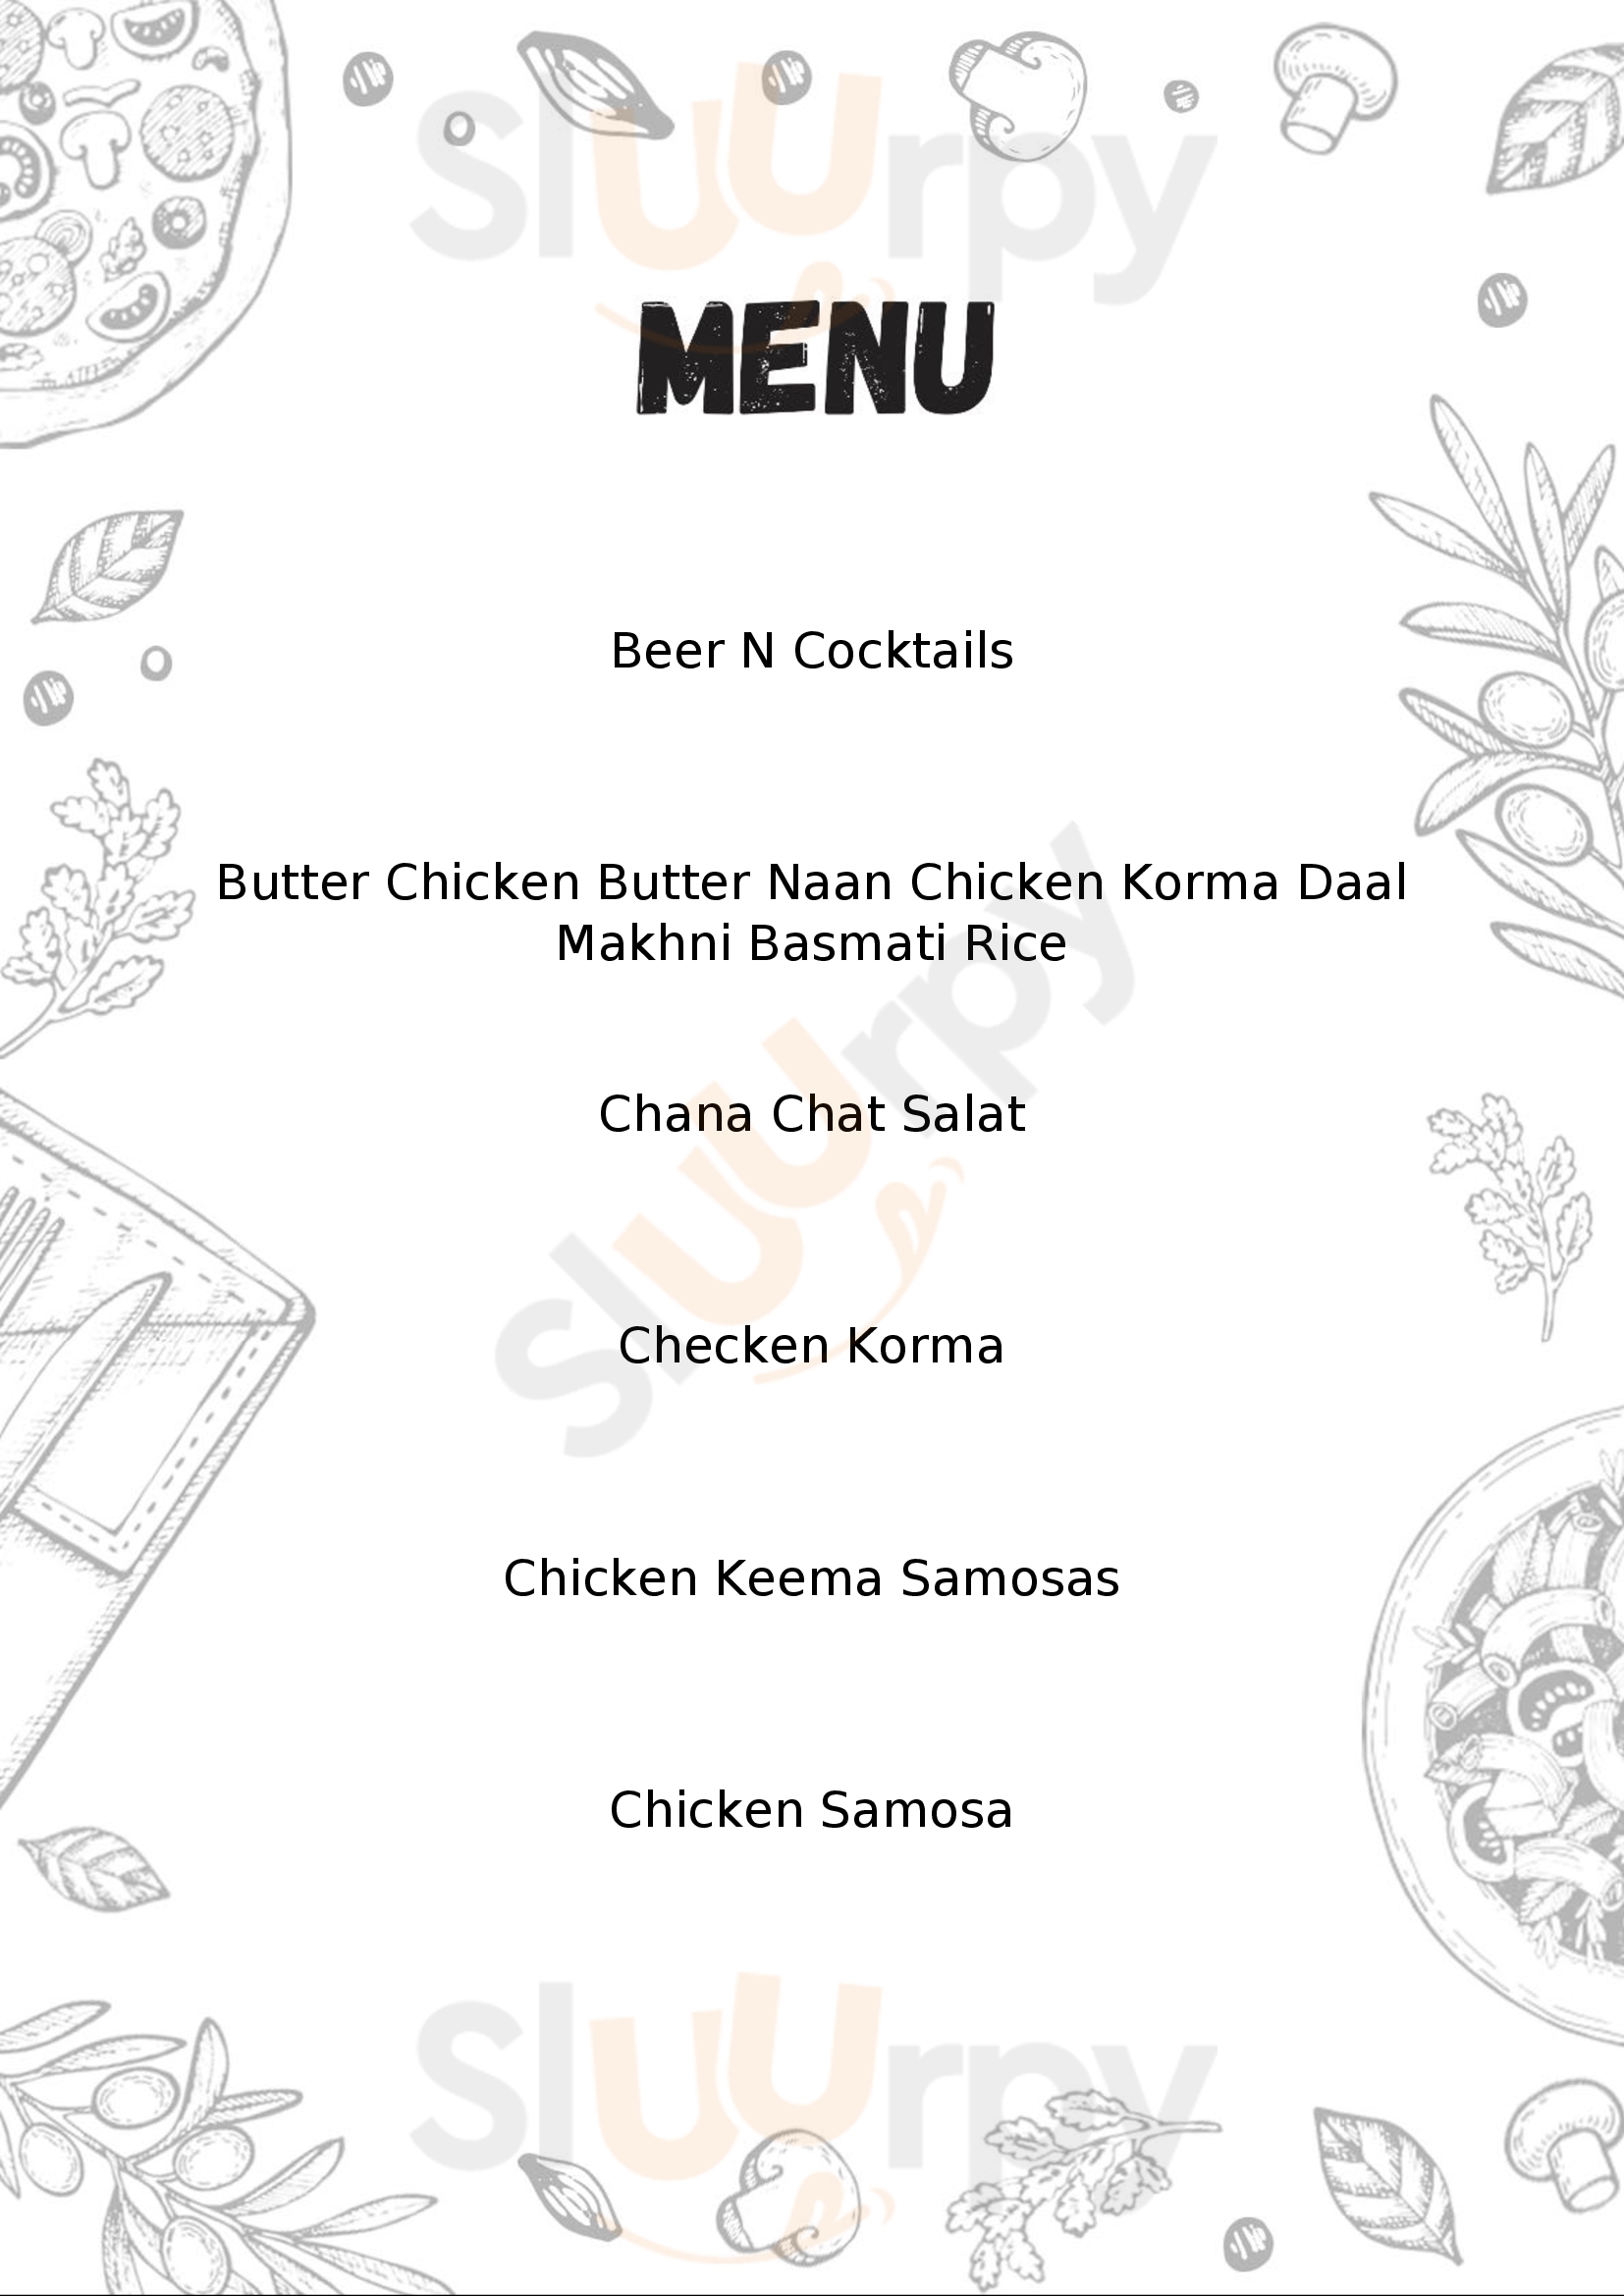 Curry Vibes - Spice Up Your Life! Wien Menu - 1